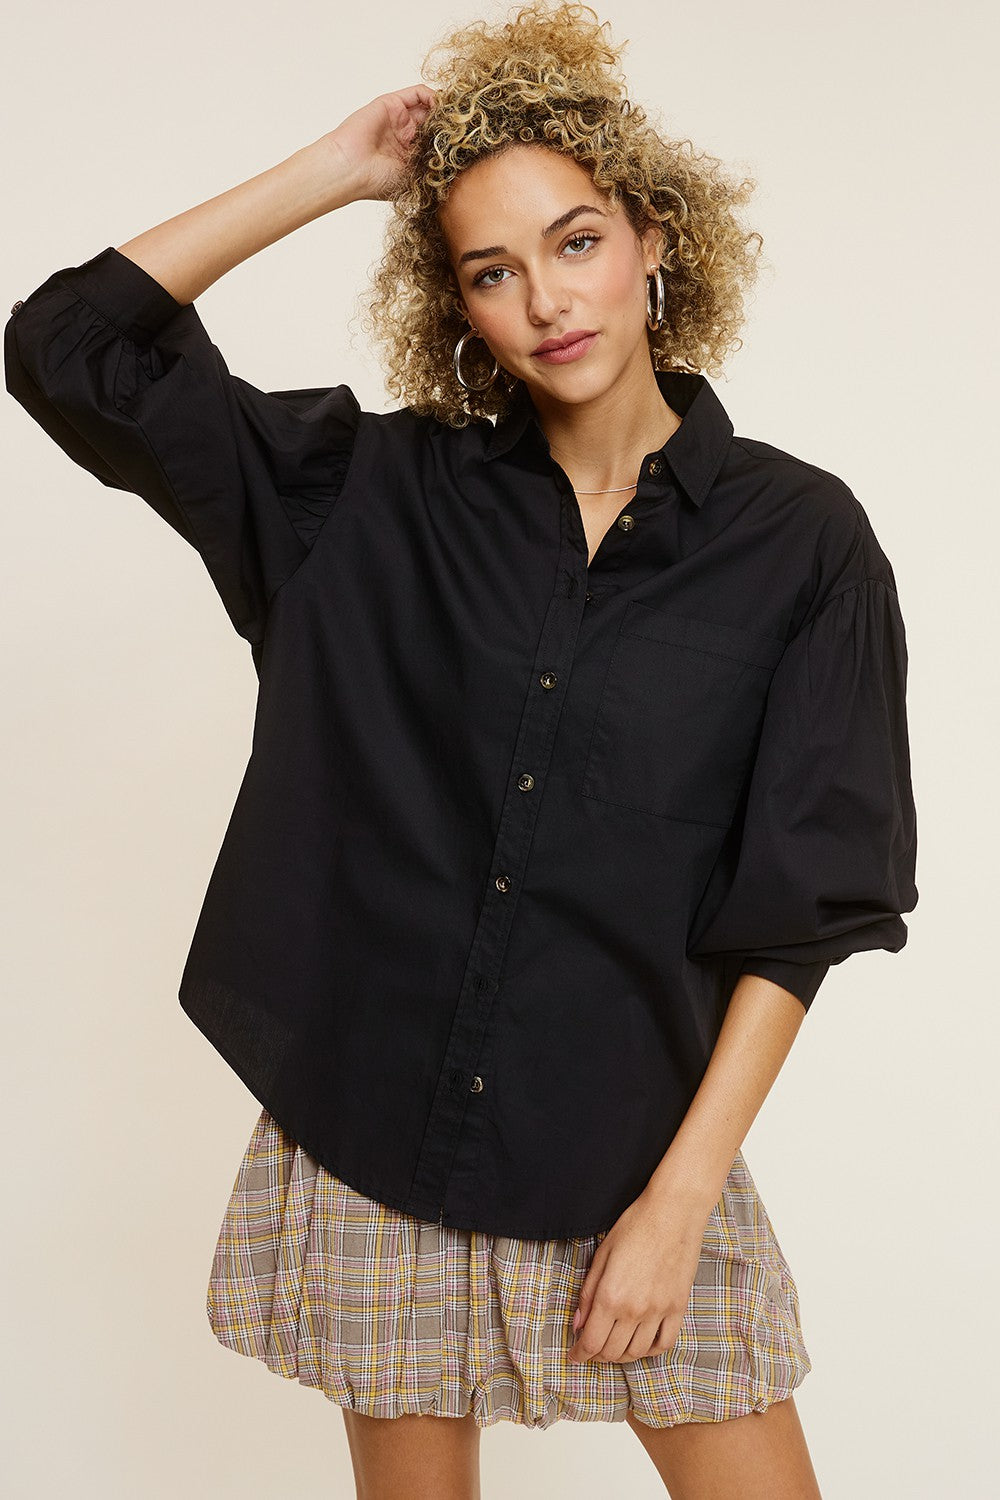 ESSENTIAL LOOSE FIT COLLARED BUTTON UP TOP